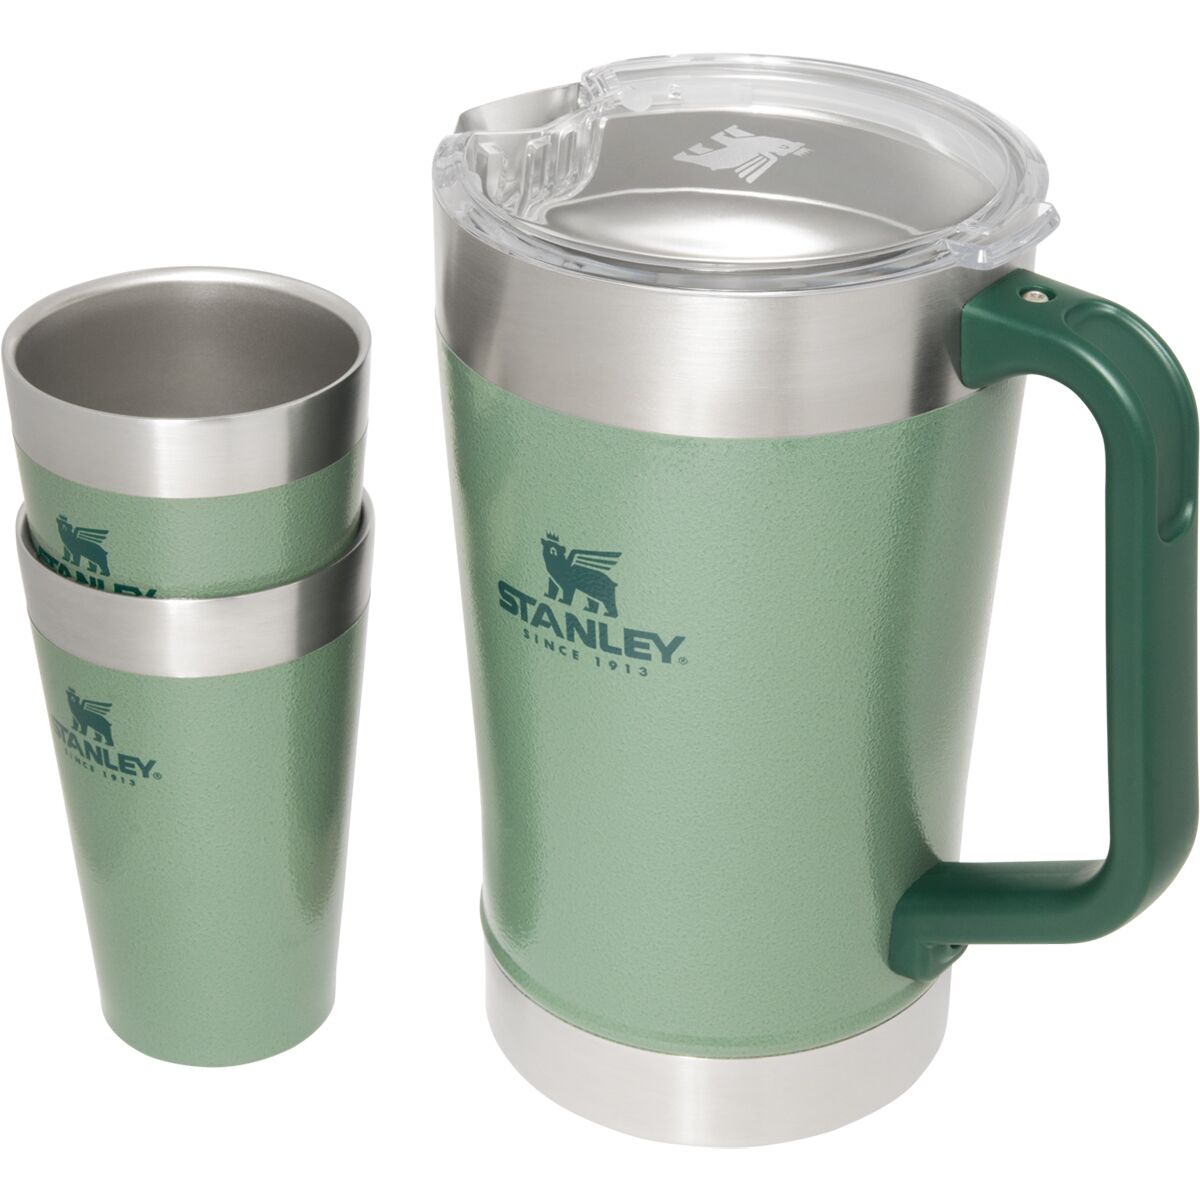 Stanley Stanley Stay-Chill Classic Pitcher 64oz Camping Kitchen Cookware at  Down River Equipment